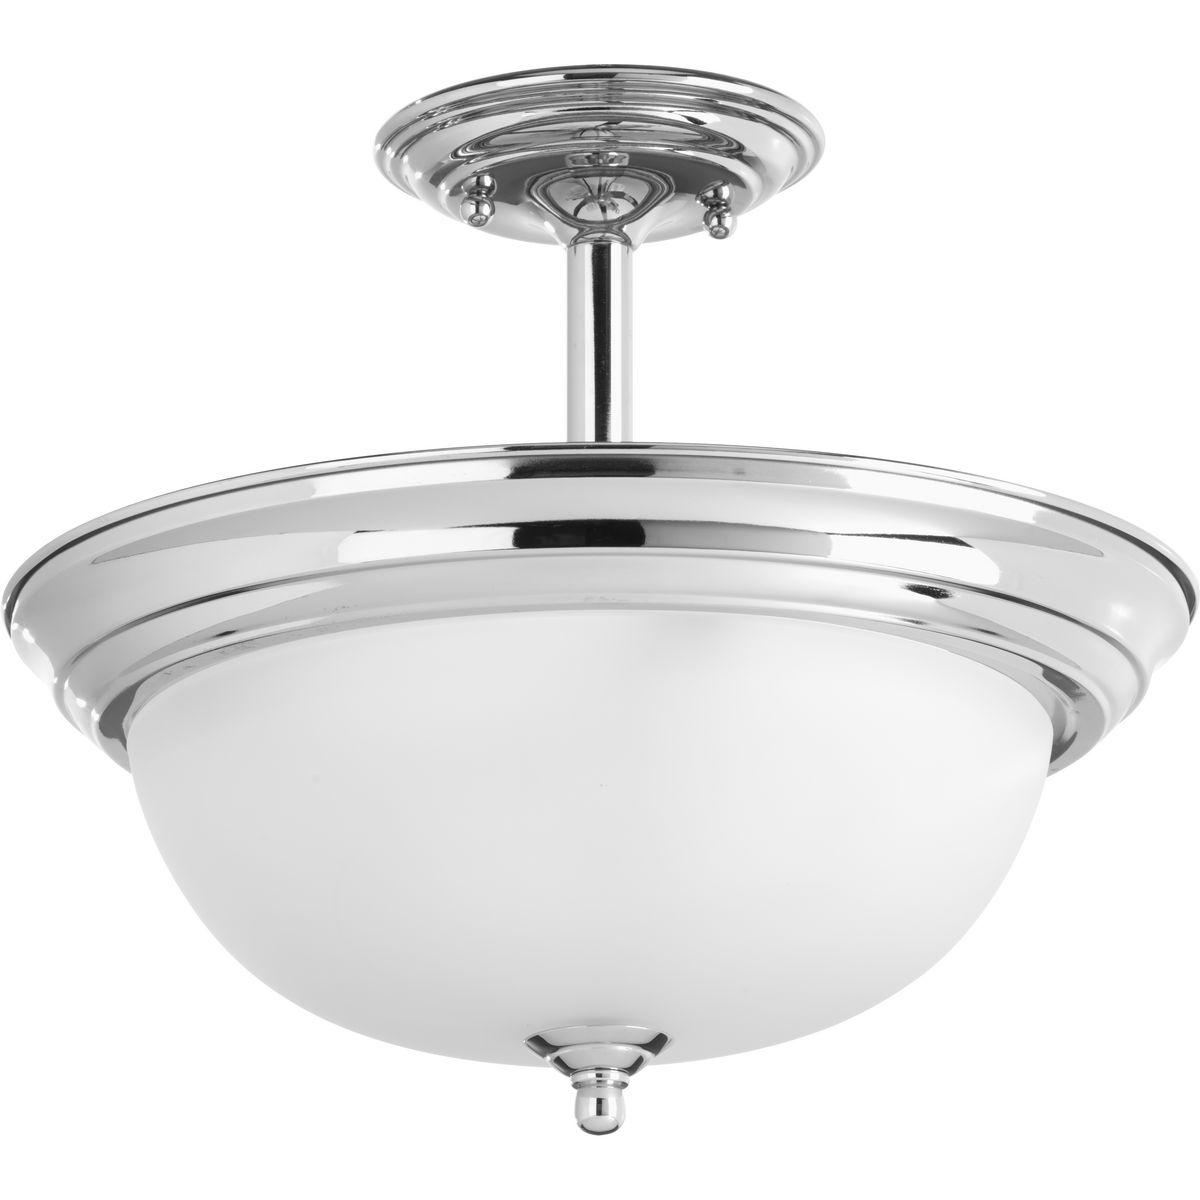 Hubbell P3927-15ET Two-light semi-flush/convertible mount with dome shaped glass, solid trim and decorative knobs. The polished chrome finish has an etched glass shade. Chain and ceiling mounts both included.  ; Dome shaped glass. ; Solid trim and decorative knobs. ; Etched